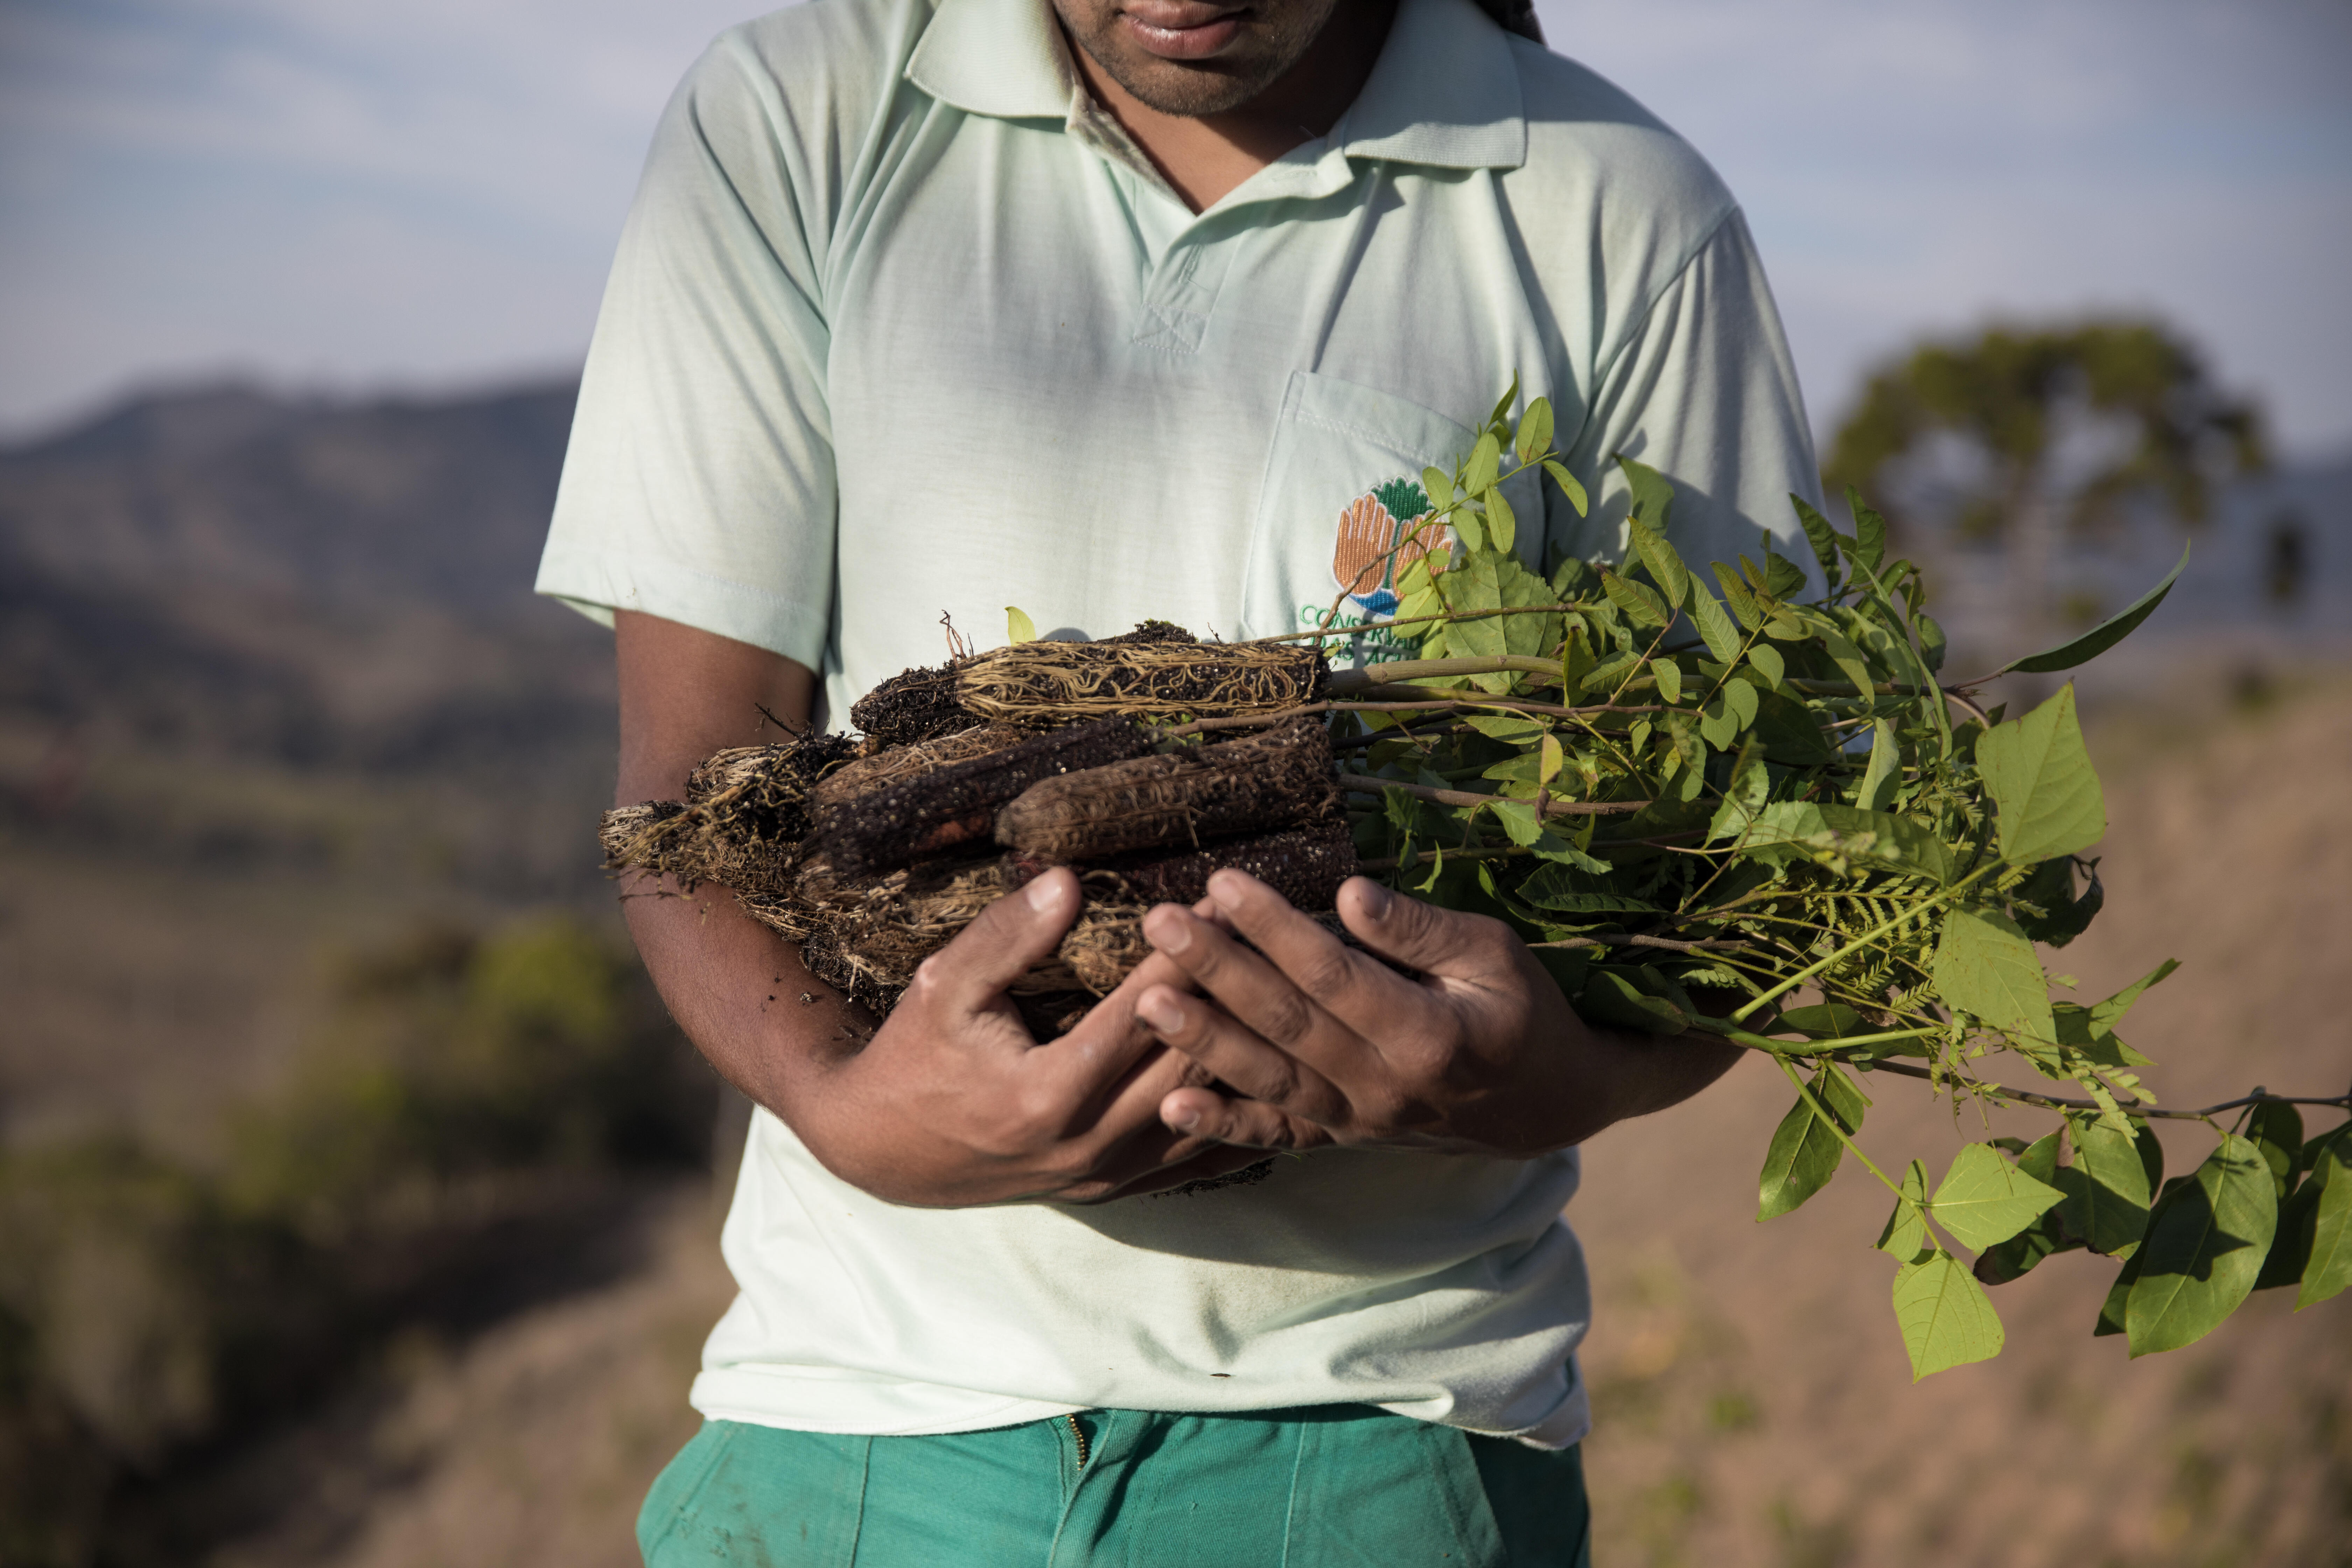 A person holds a collection of tree saplings in their arms.